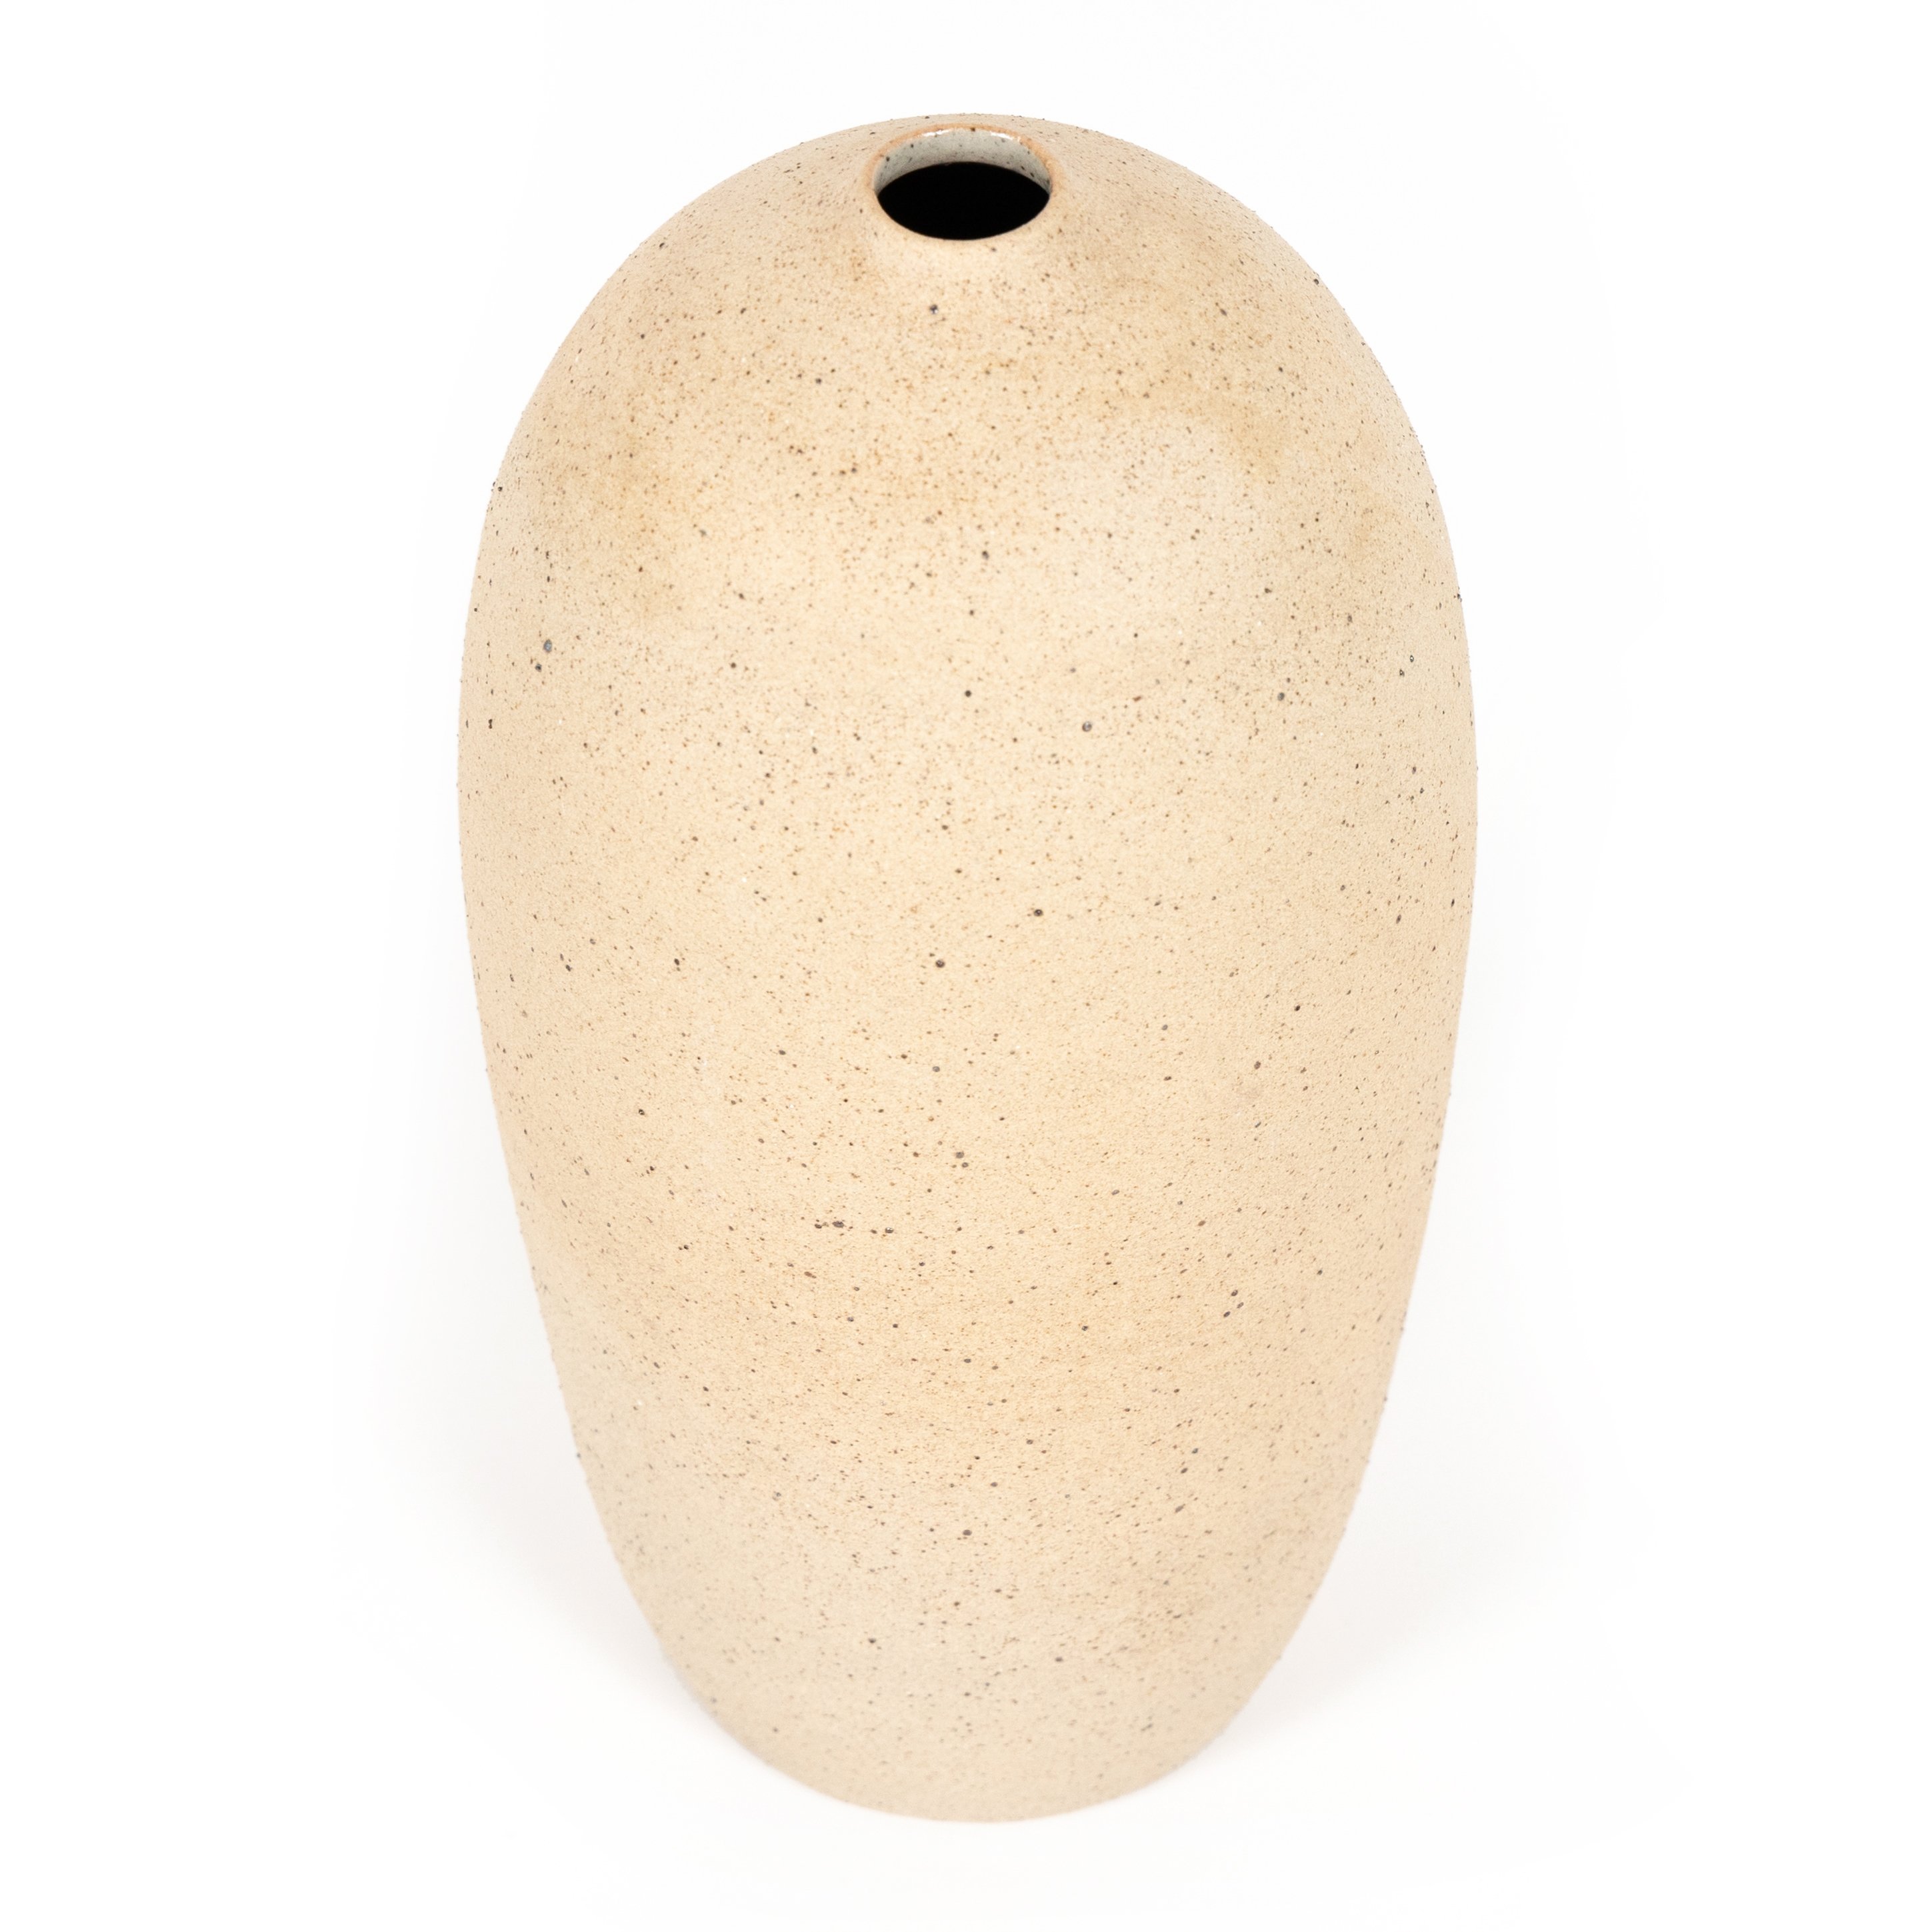 Izan Tall Vase-Natural Speckled Clay - Image 4